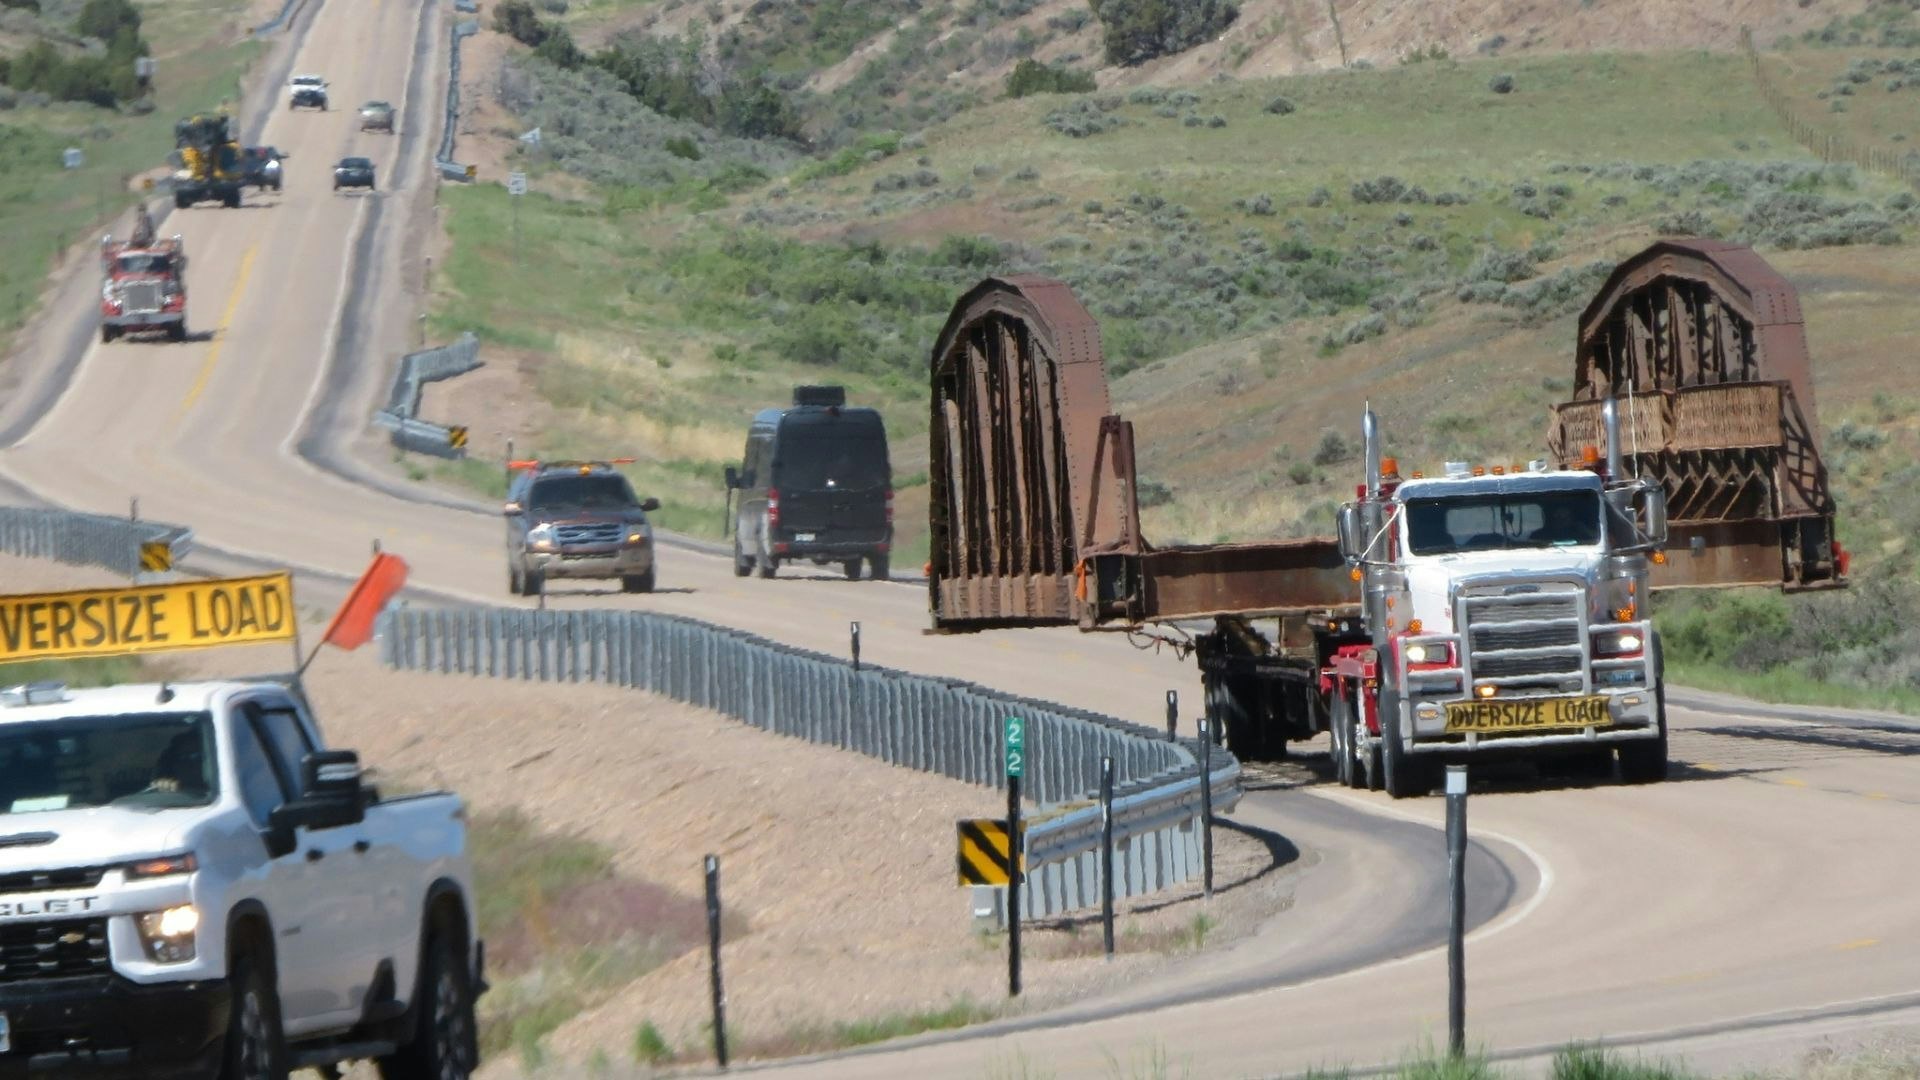 A rancher near Ten Sleep paid $1,100 for the 100-year-old Winchester Bridge in Washakie County. It was moved this week 40 miles to the rancher's property.